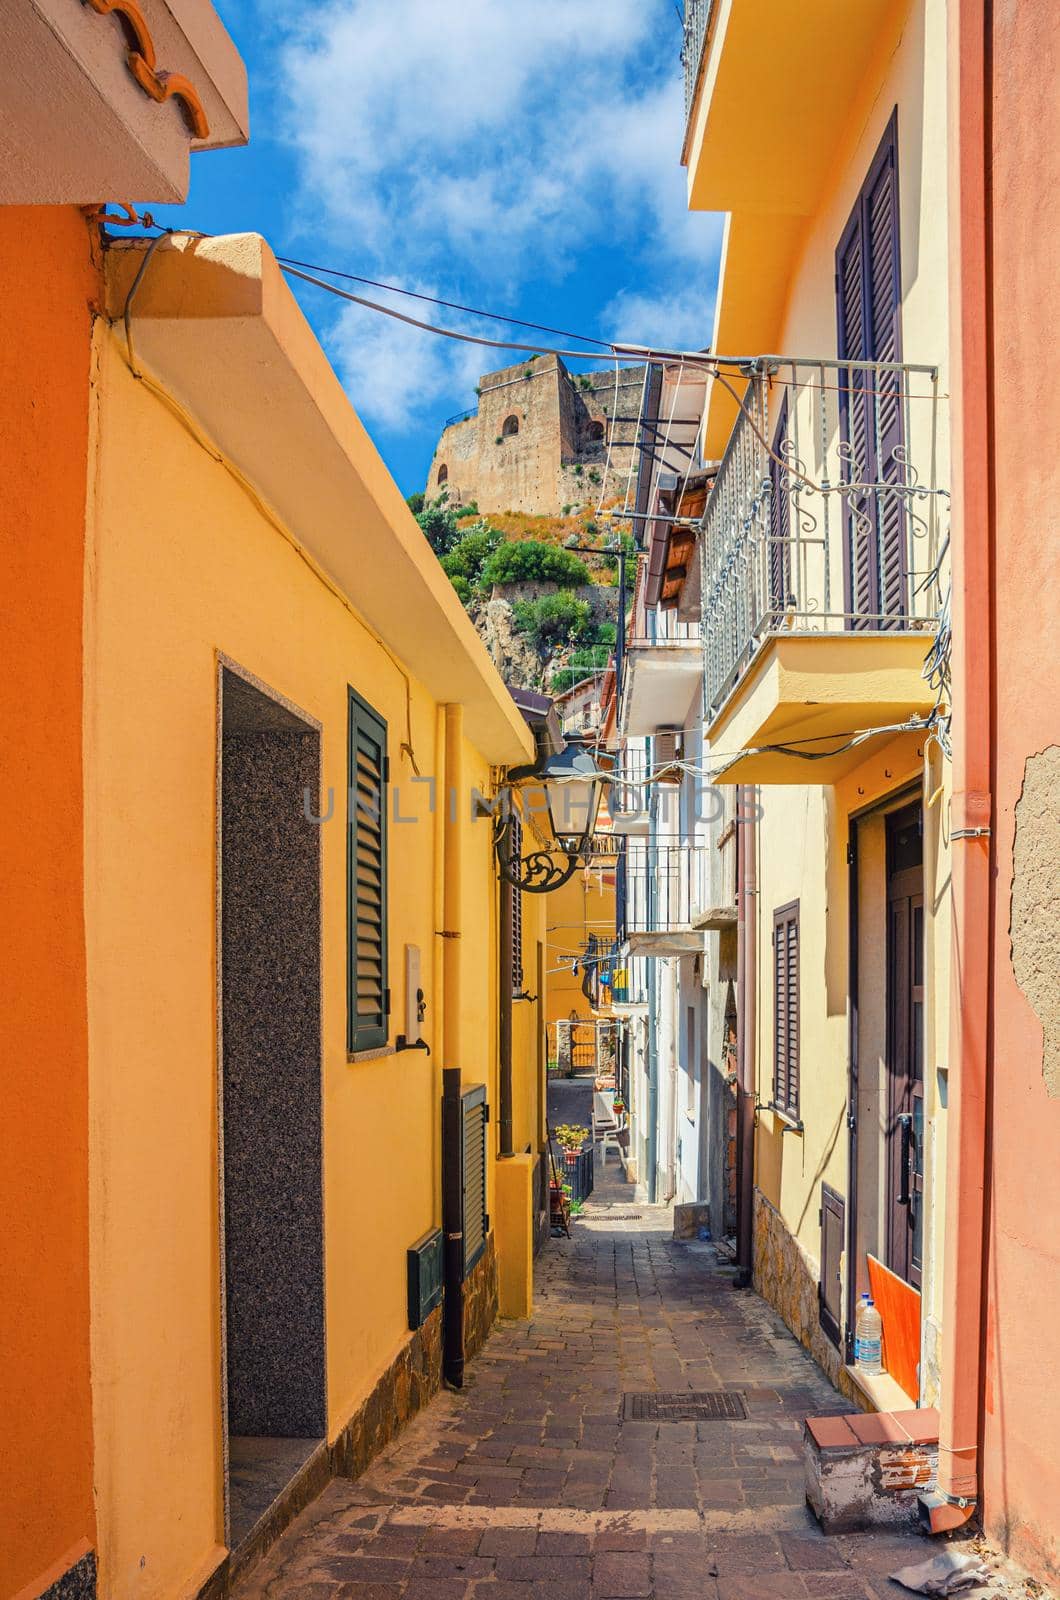 Narrow pedestrian street between buildings with colorful walls in seaside small town Scilla, old medieval castle Castello Ruffo background, Calabria, Southern Italy